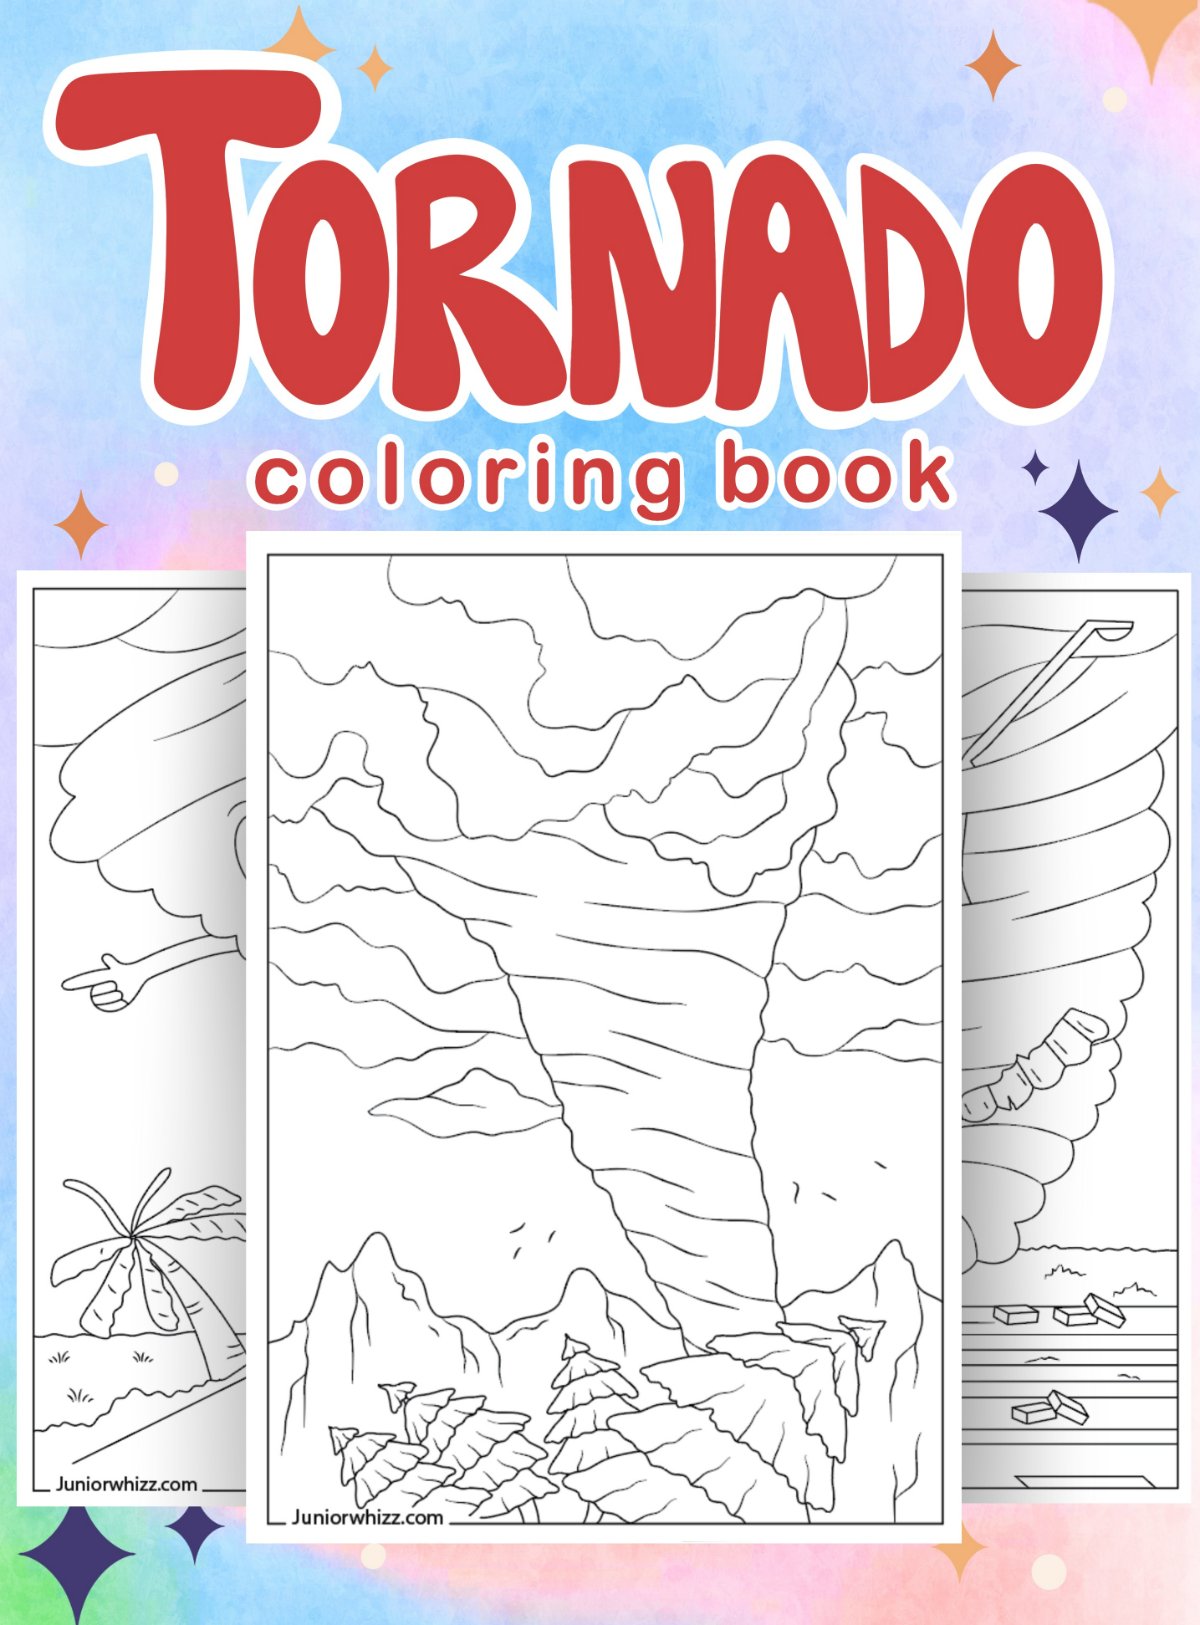 tornado siren coloring pages